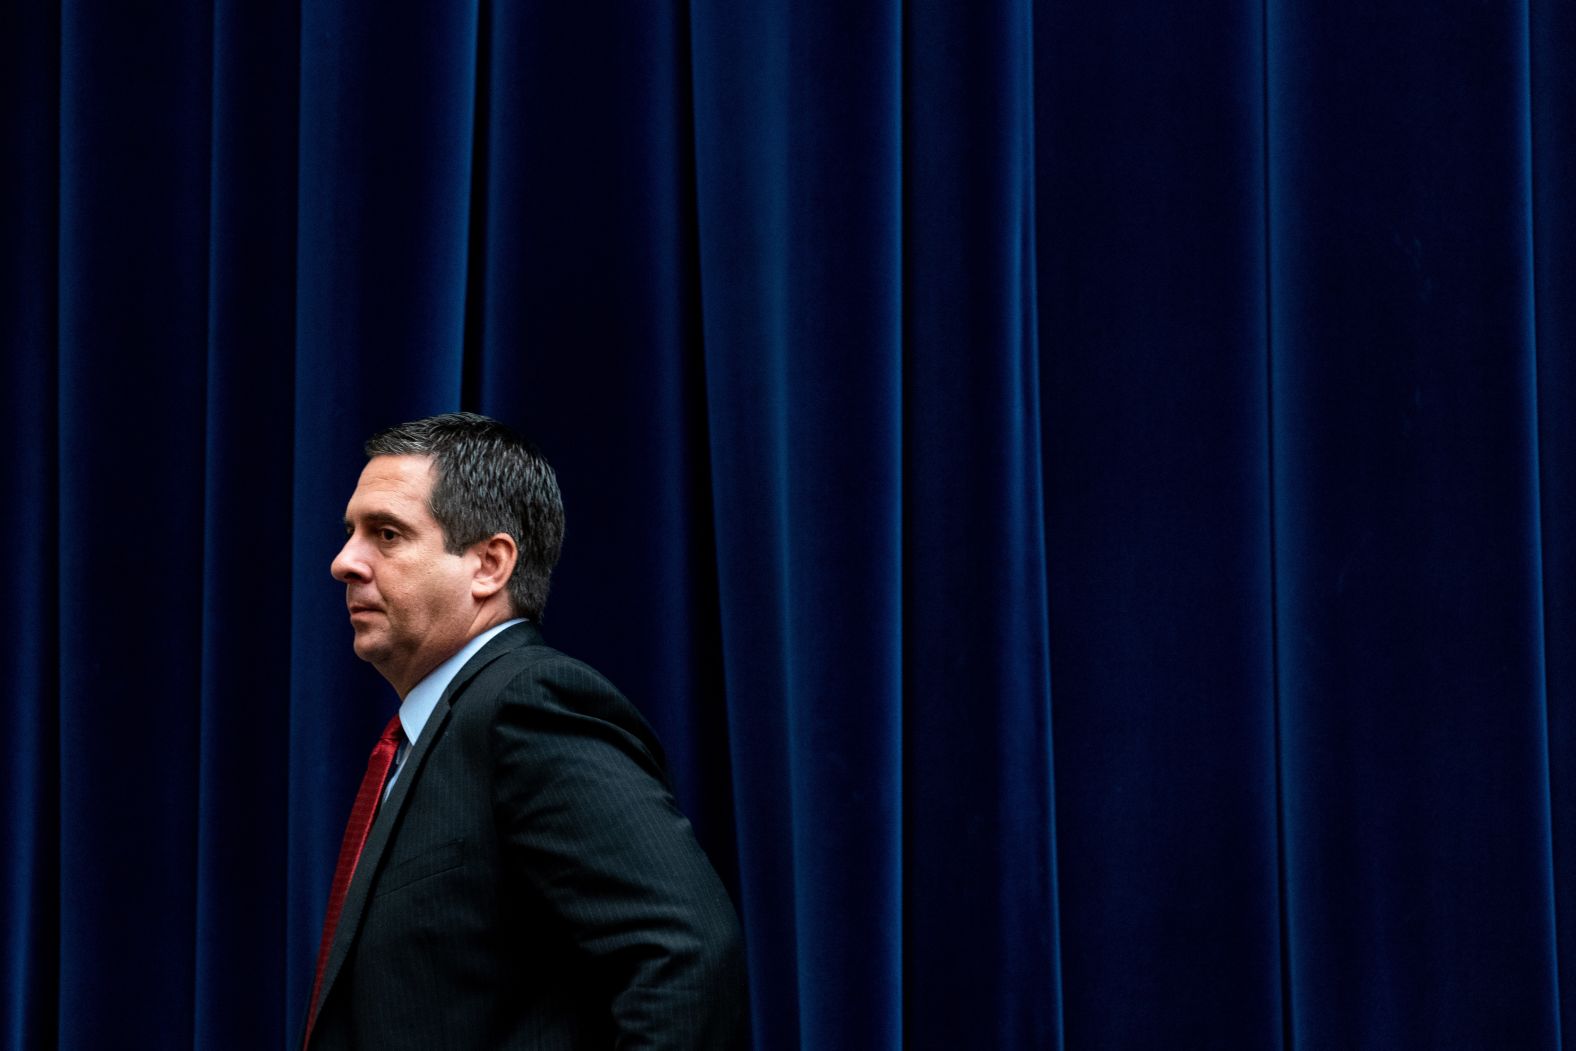 US Rep. Devin Nunes, a Republican and the ranking member of the House Intelligence Committee, attends the Maguire hearing on September 26. <a href="https://www.cnn.com/politics/live-news/whistleblower-complaint-impeachment-inquiry/h_70ea414354a087a424dd9f8627f140e6" target="_blank">During his opening remarks,</a> Nunes said the whistleblower complaint "relied on hearsay evidence."